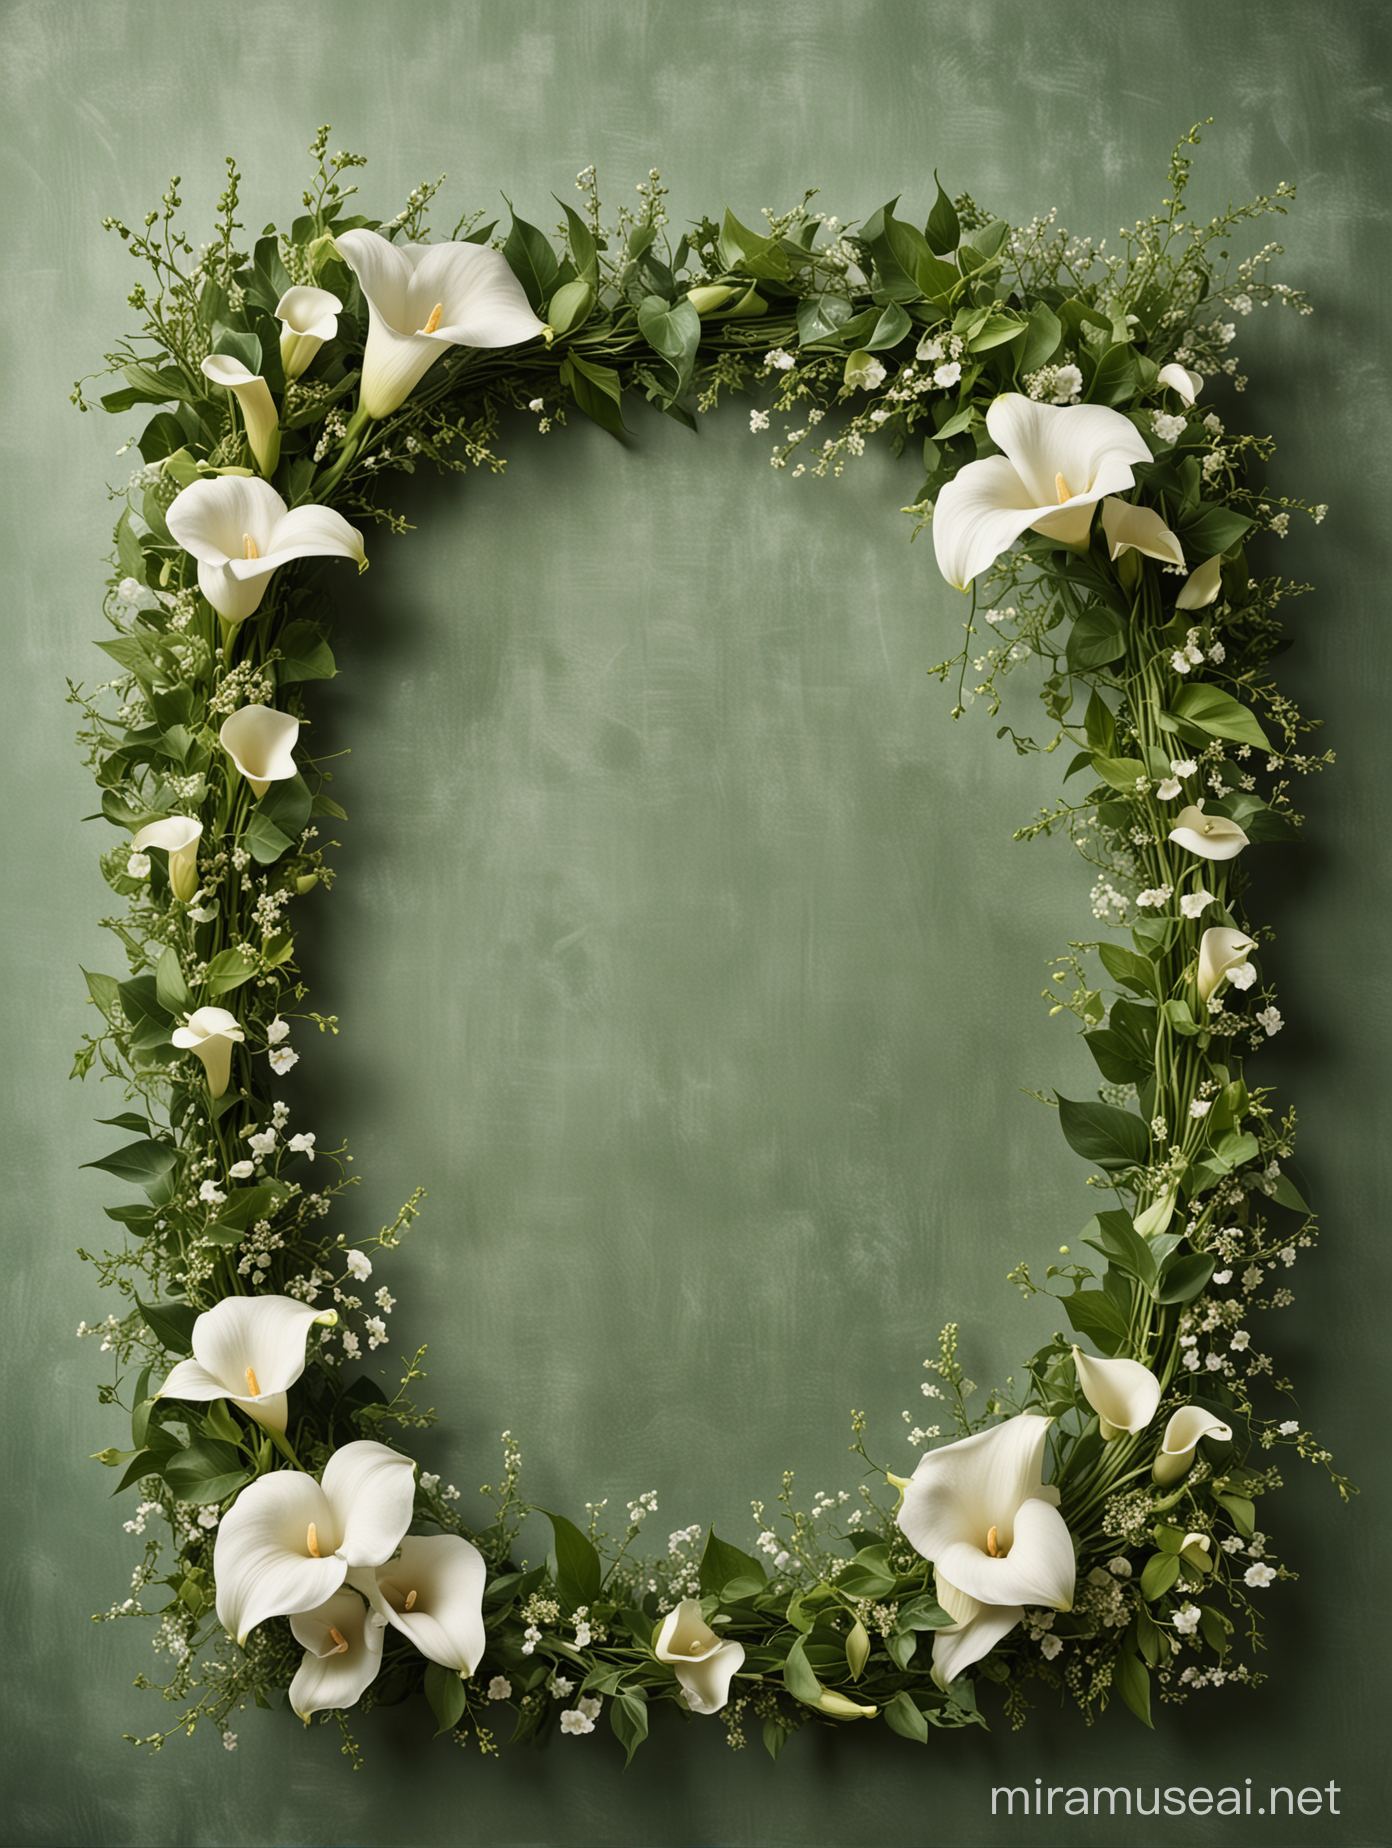 Elegant Frame of Swirling Ivy and Florals on Greenish Fabric Background